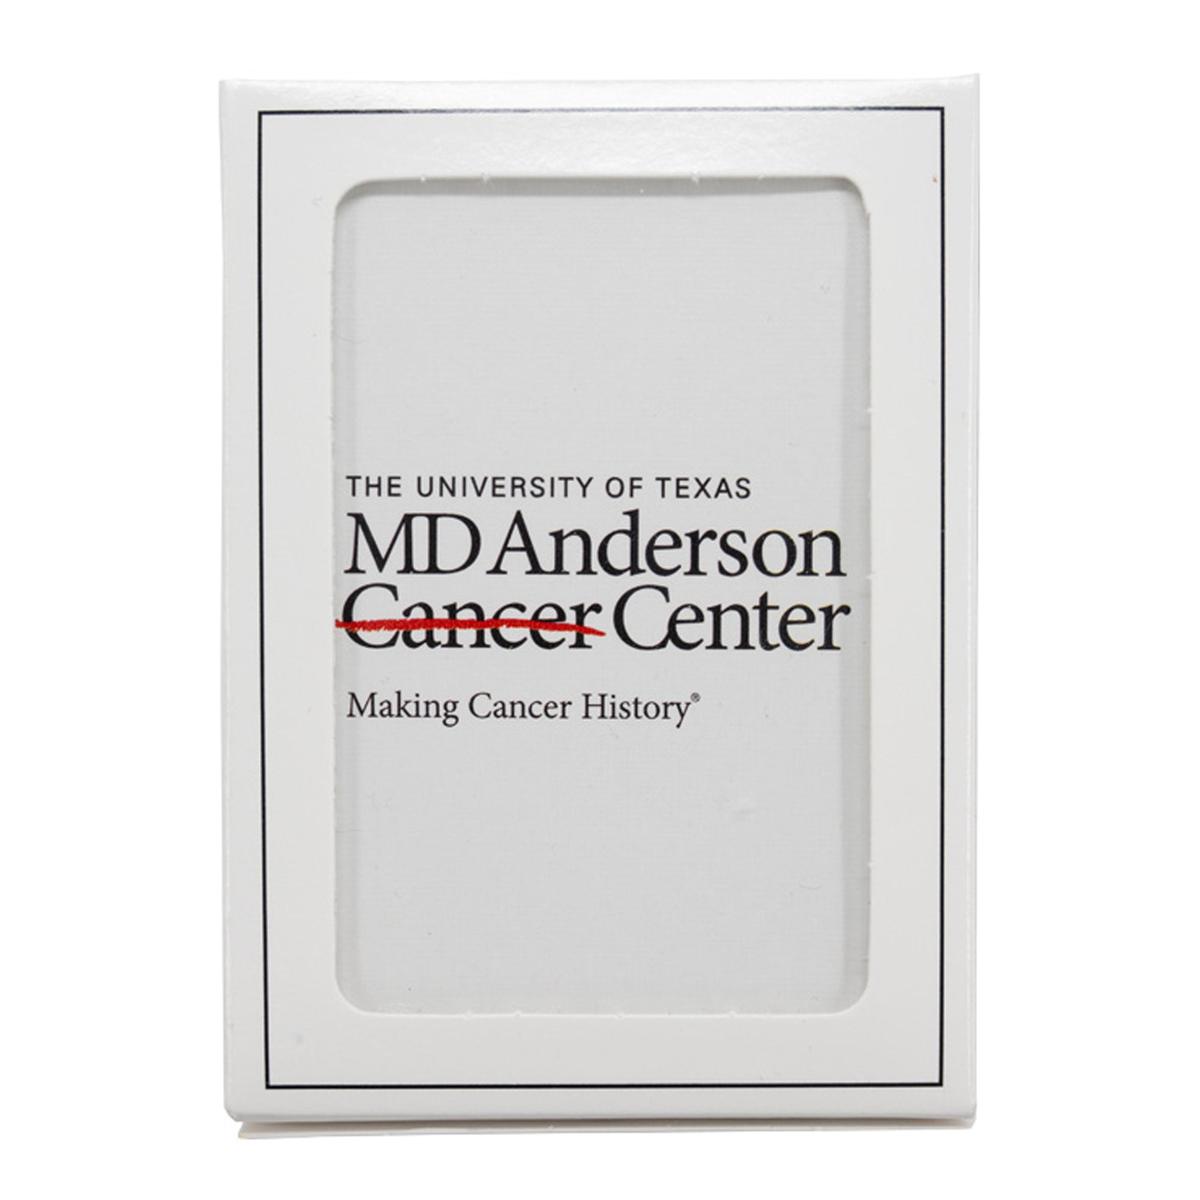 Set of white playing cards featuring the black MD Anderson logo.